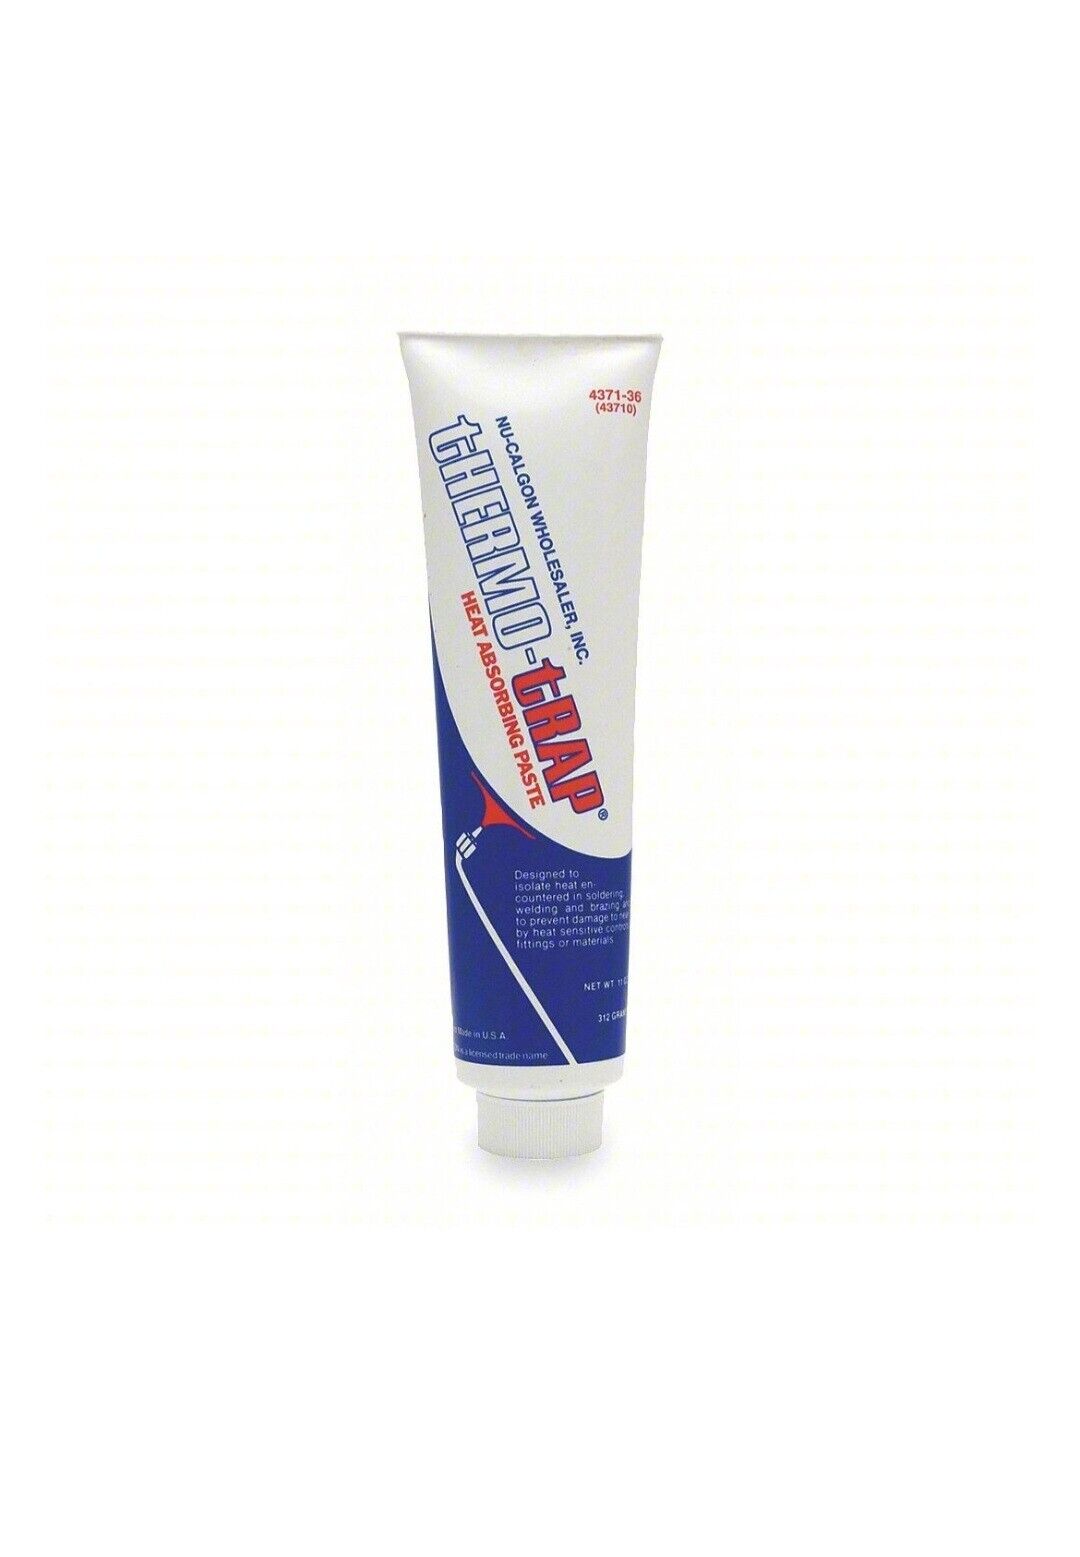 NU-CALGON. P/N: 4371-36. THERMO-TRAP HEAT ABSORBING PASTE. 11 OZ. TUBE. 1600°F